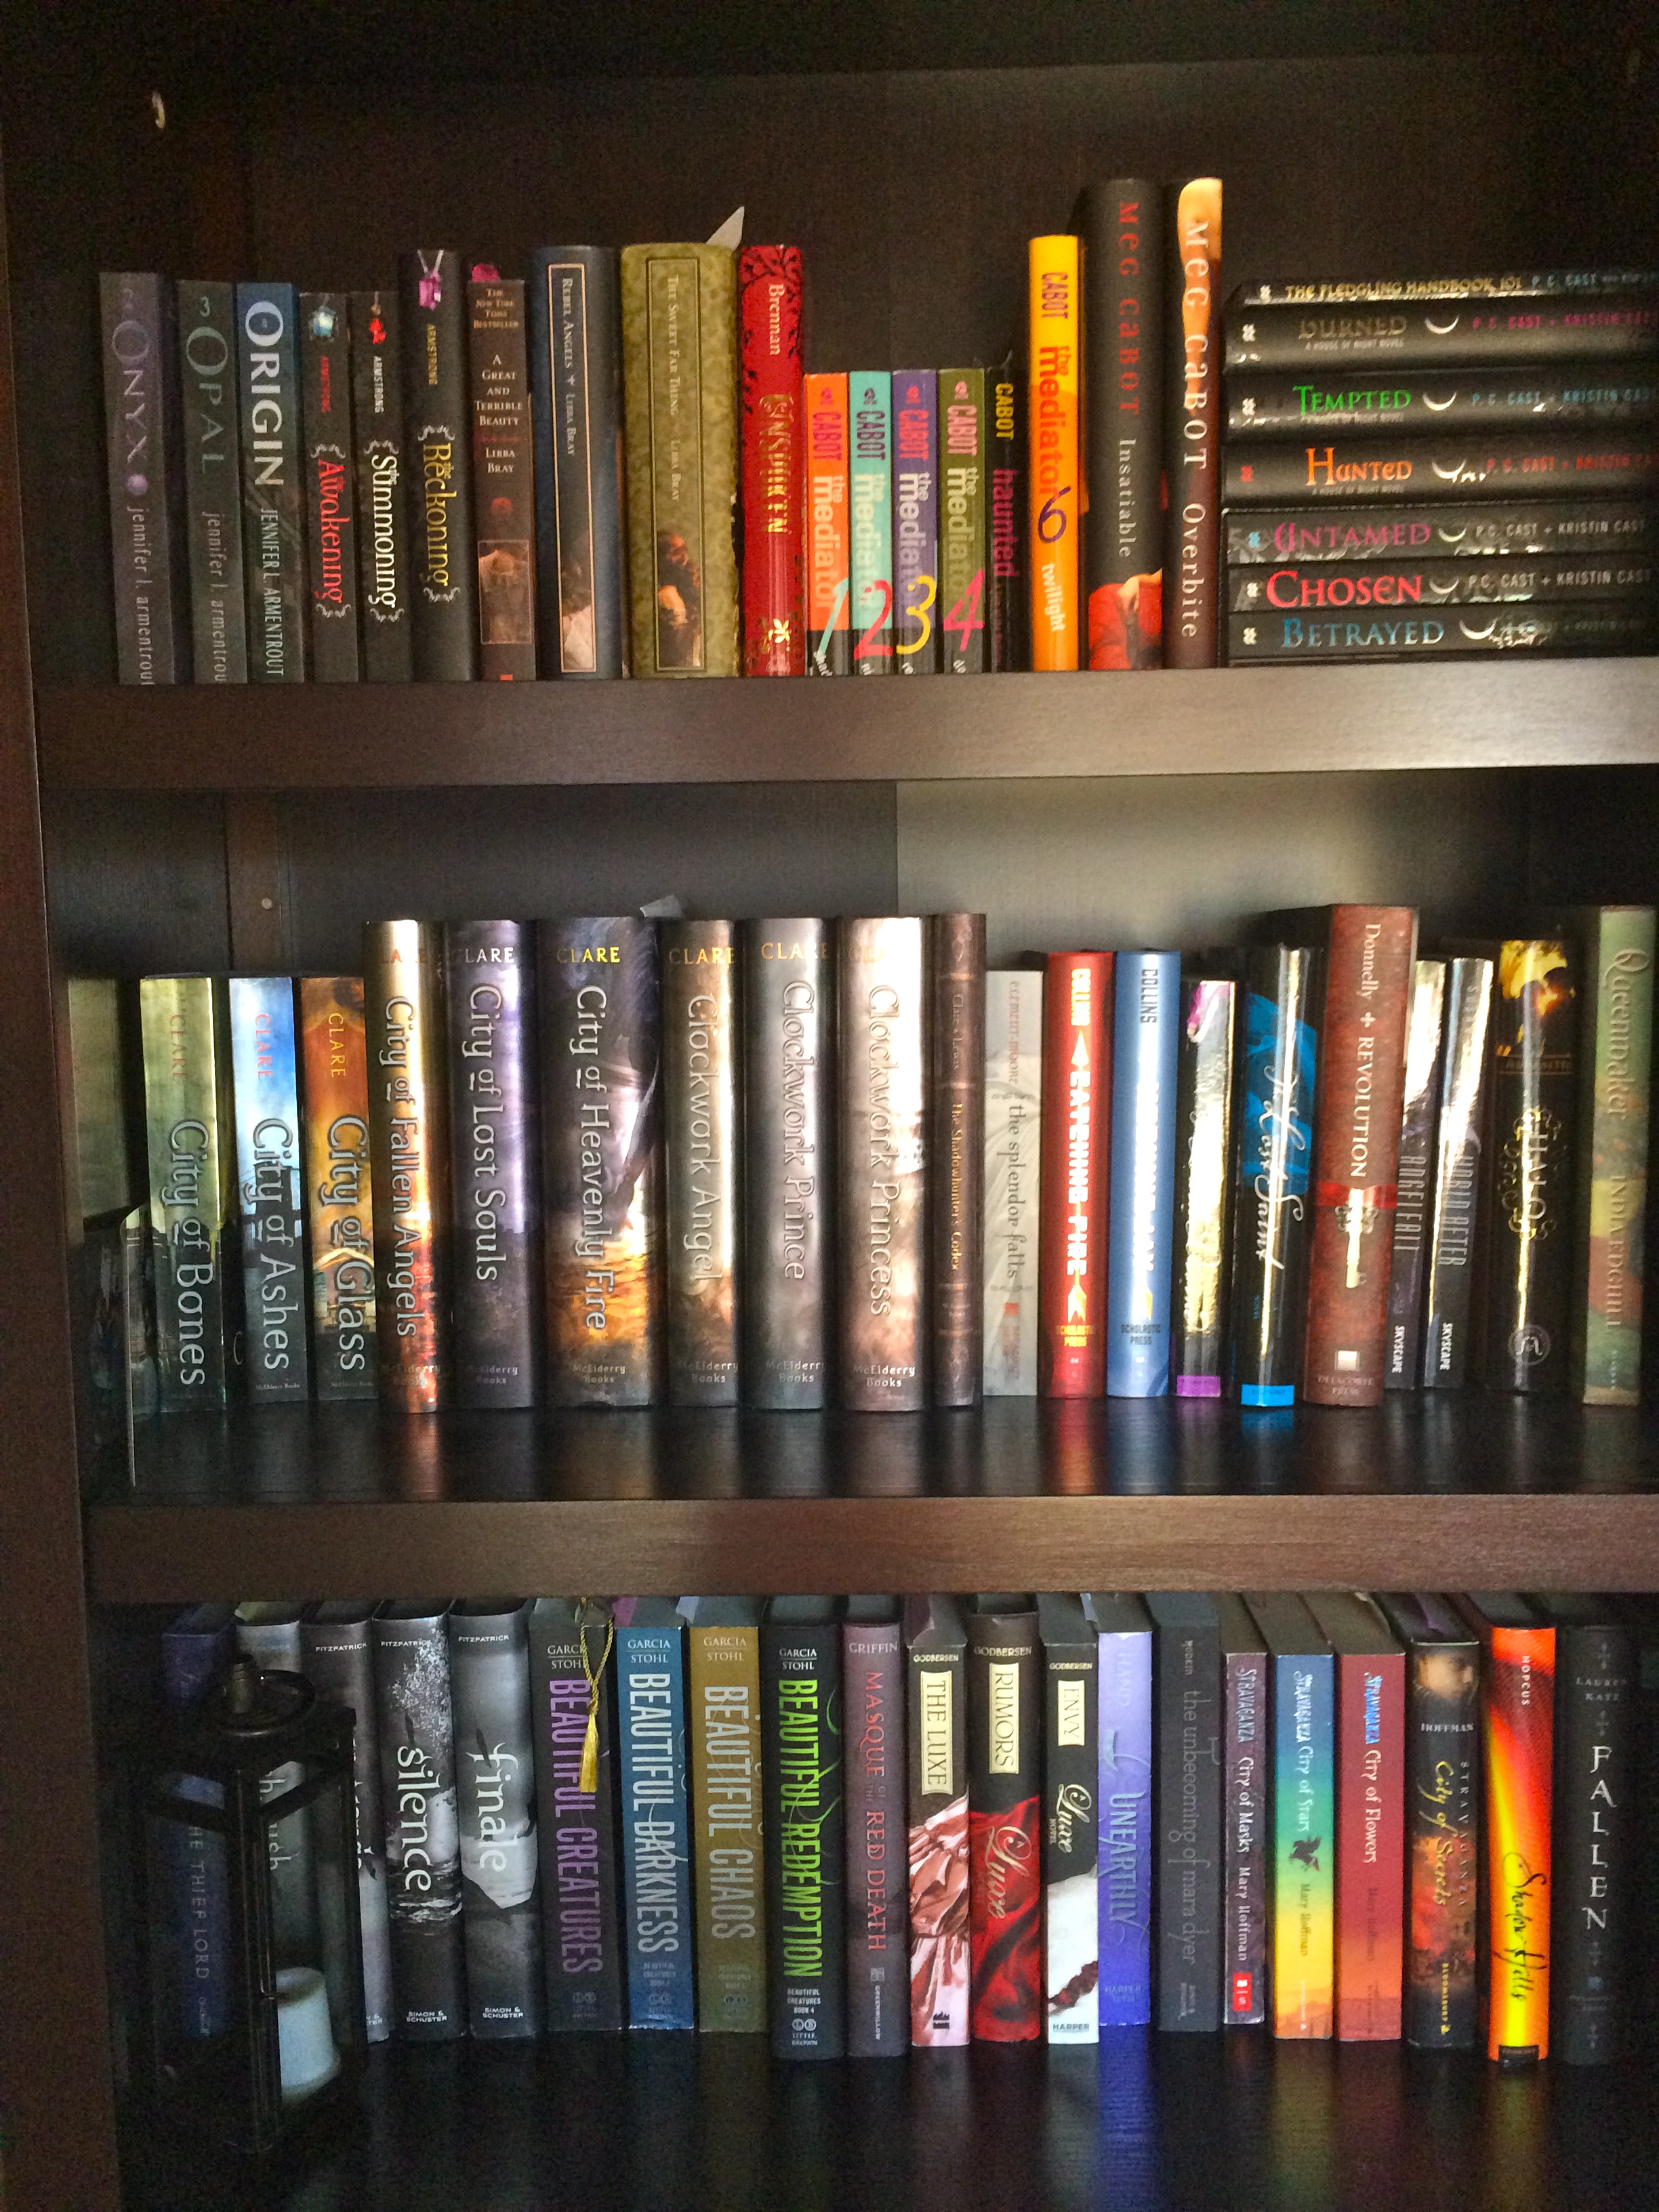 The fantasy/paranormal side of my bookshelves